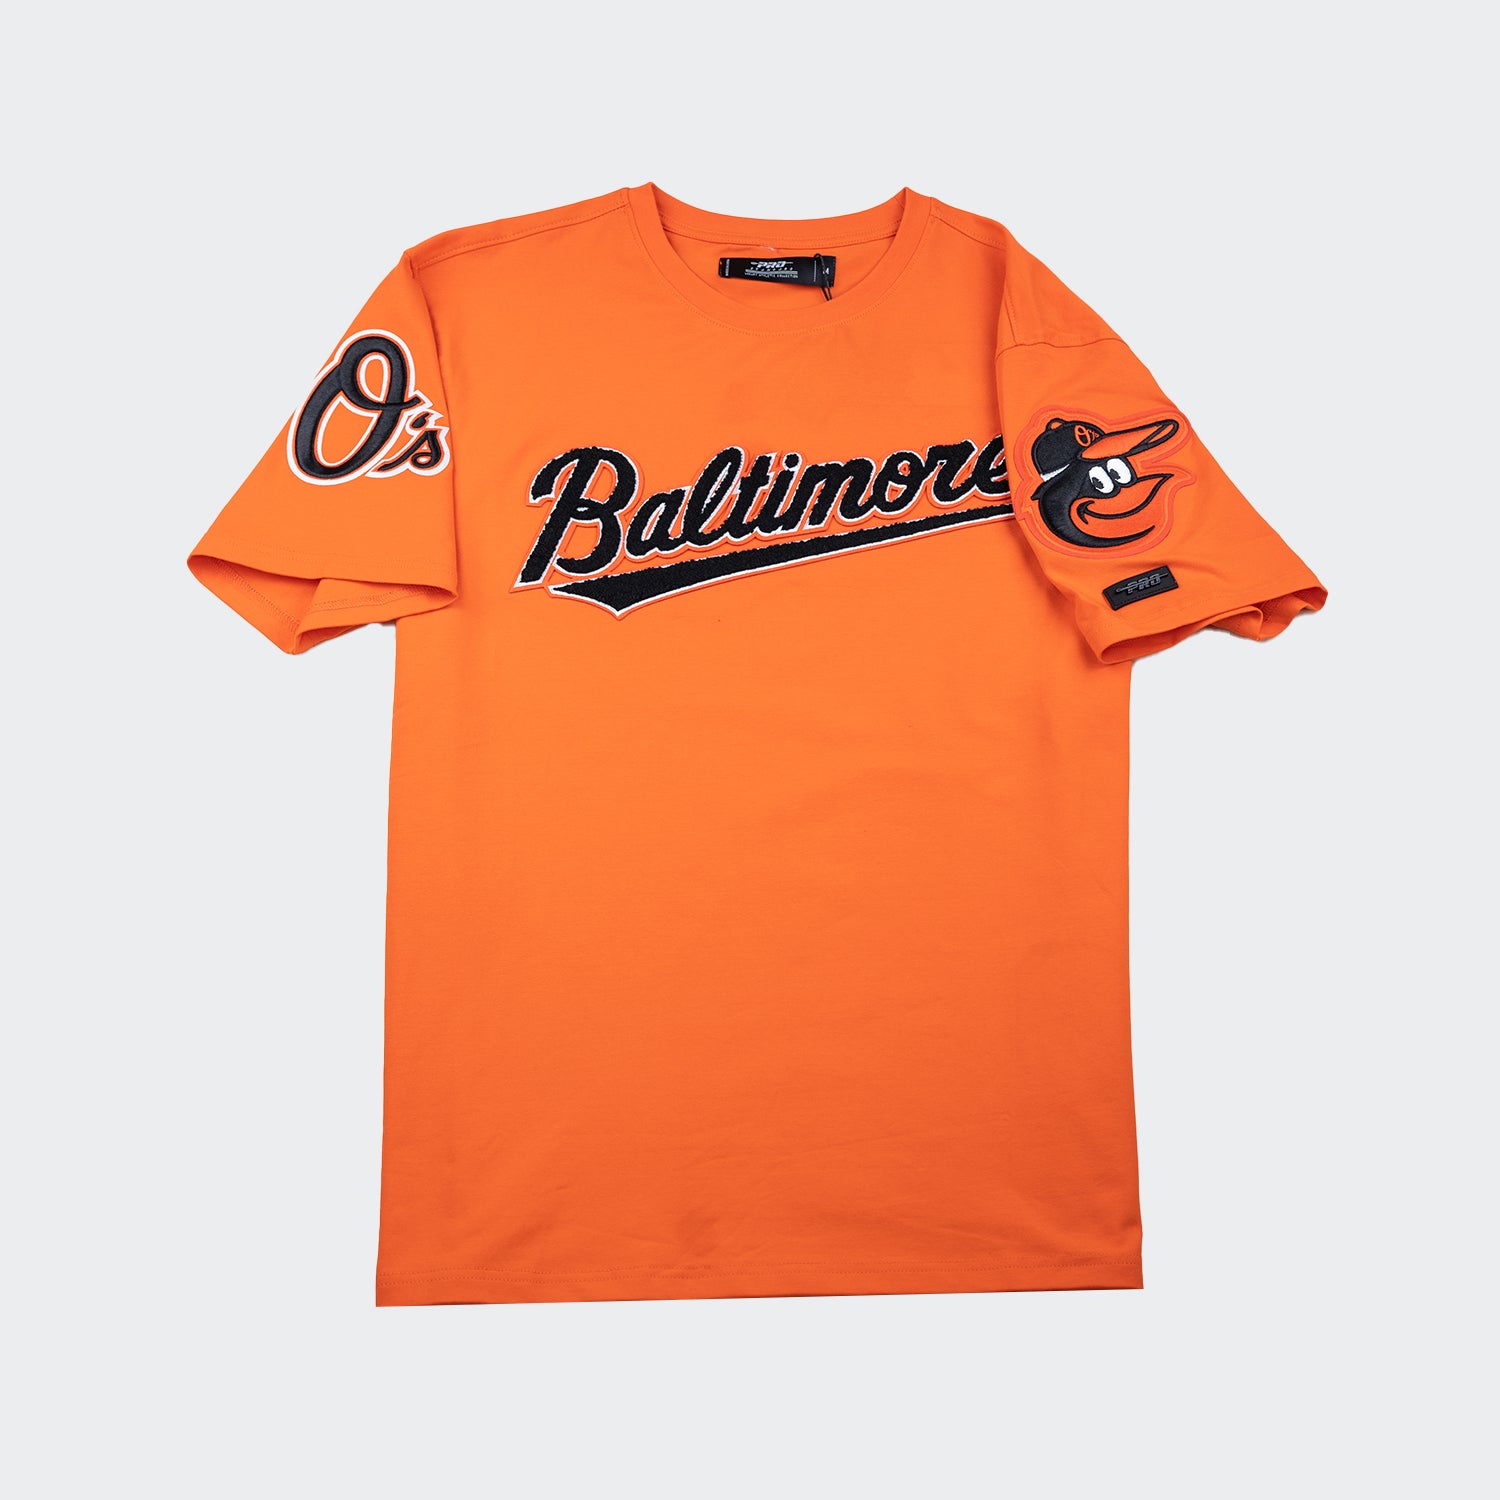 Baltimore Orioles on X: Get your gear at our Team Store today